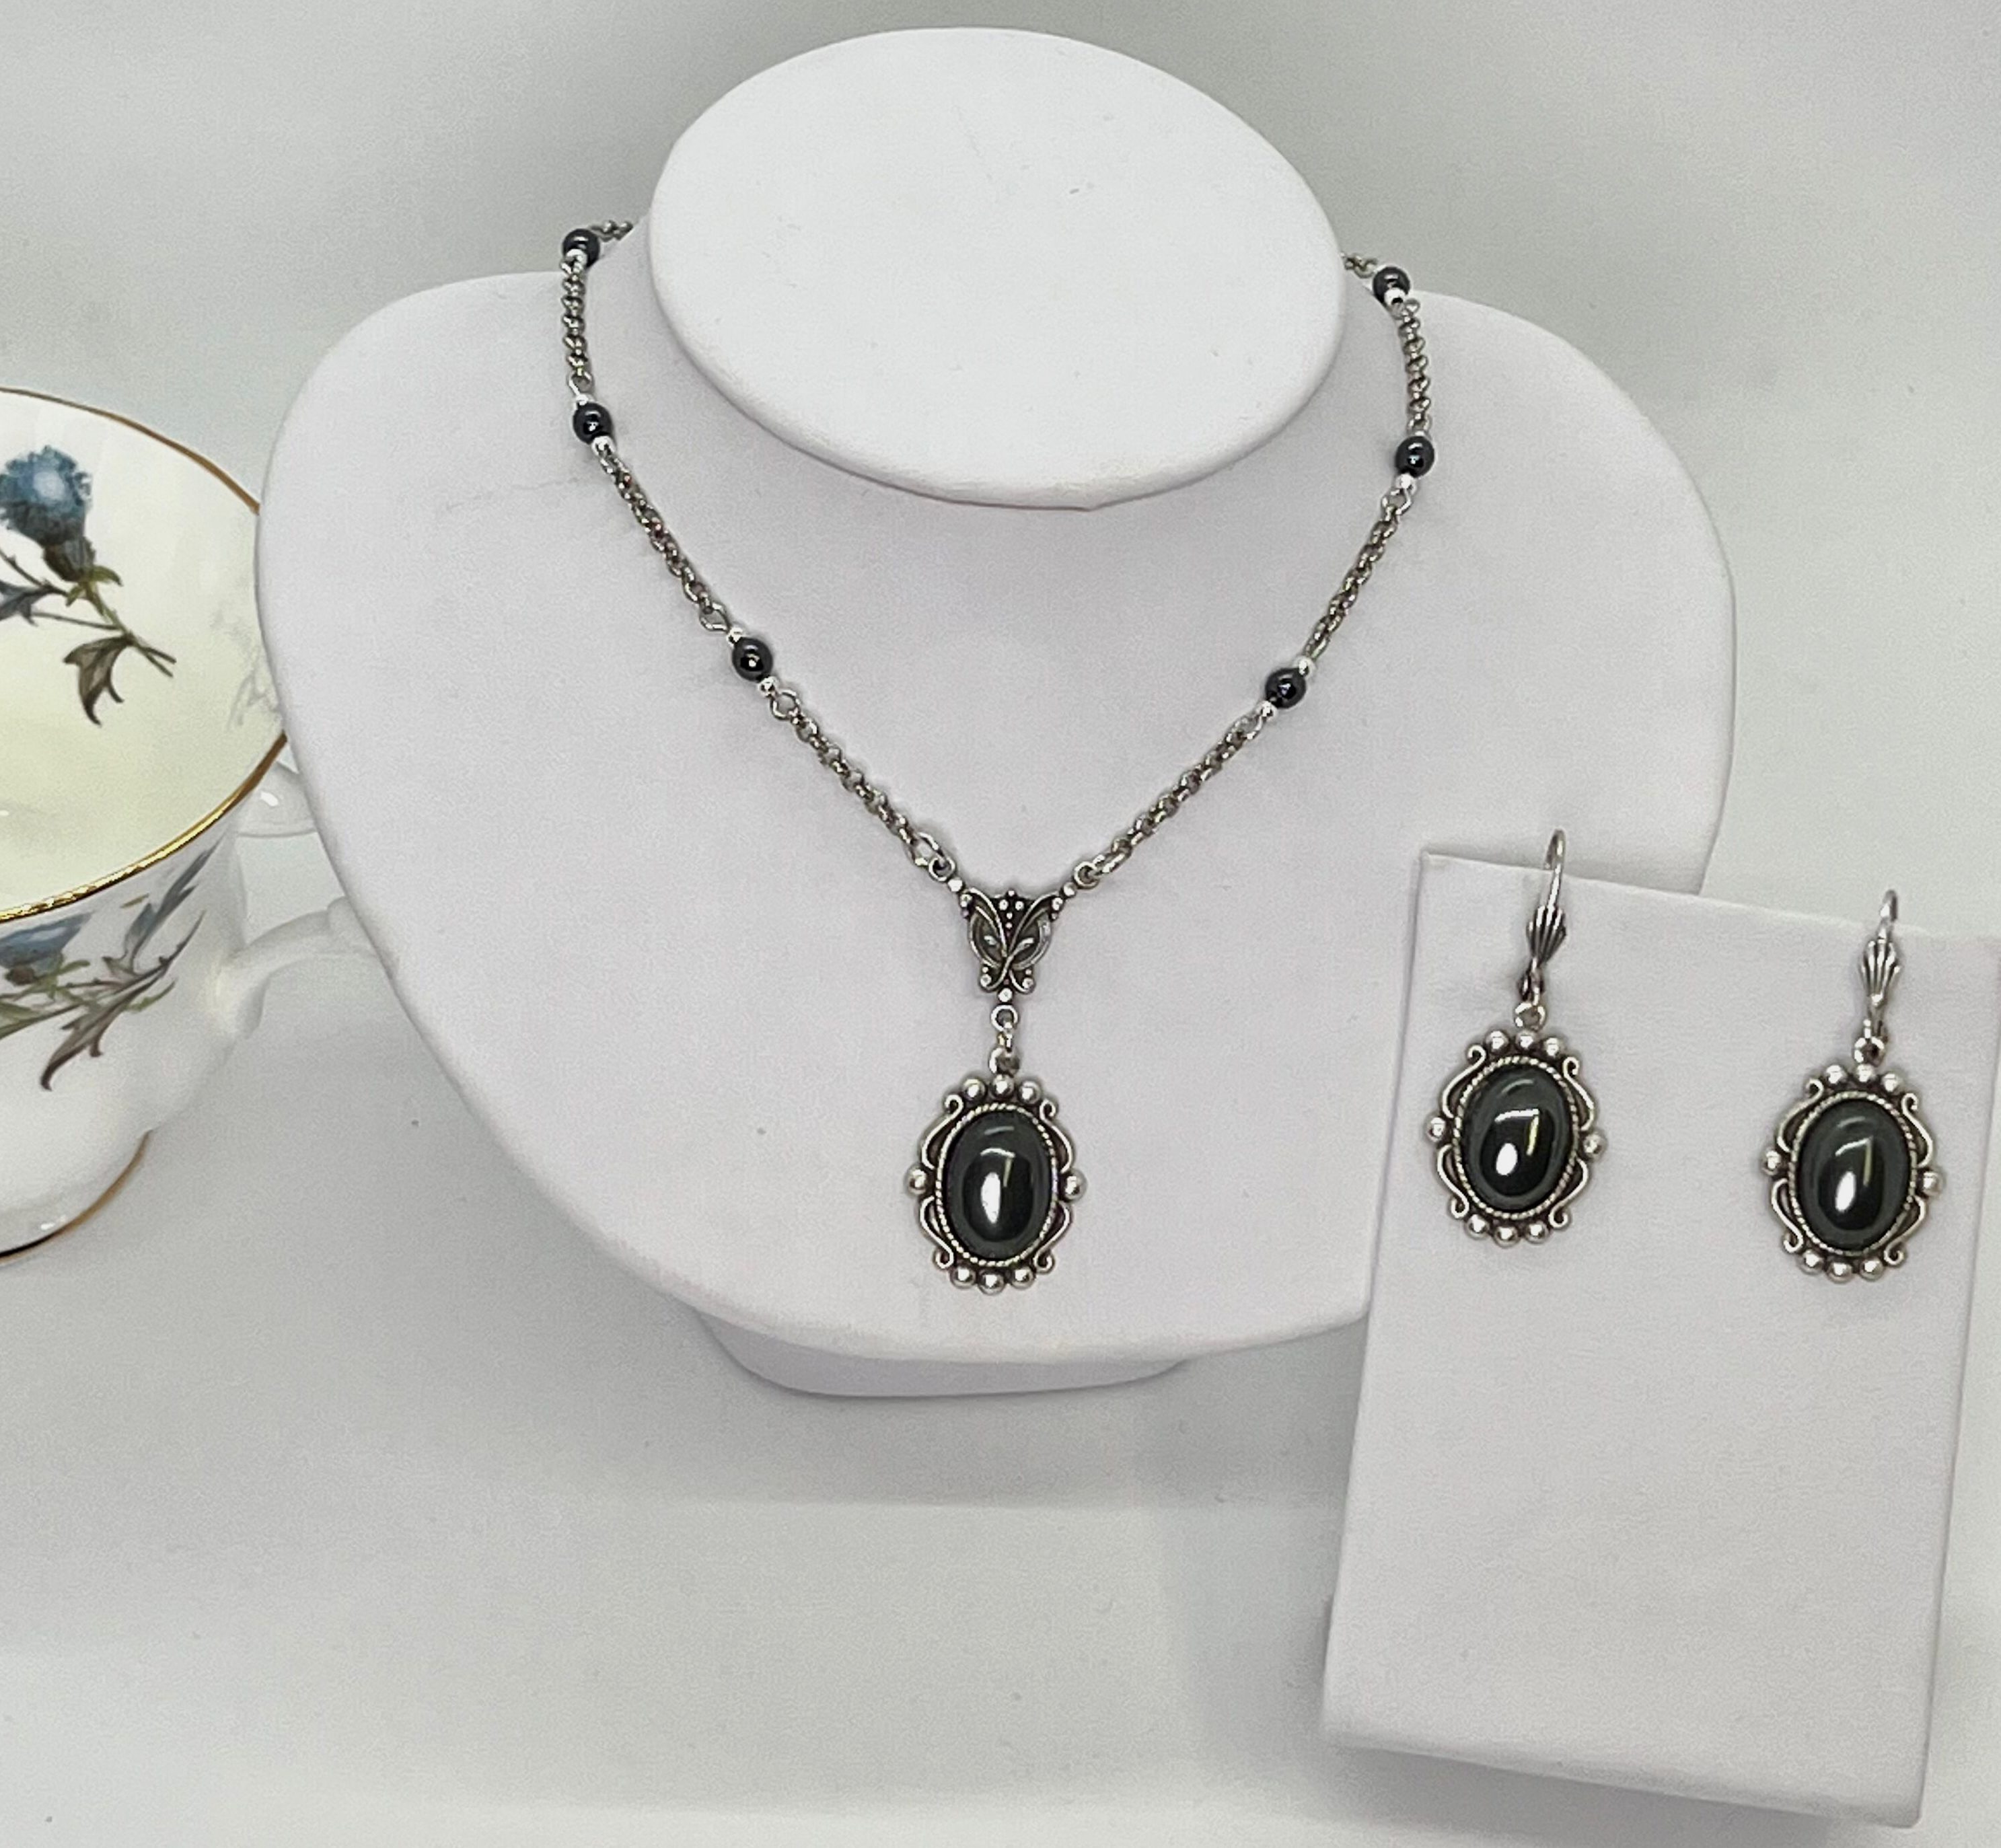 Hematite Gemstone Necklace and Earrings - Confederate Museum